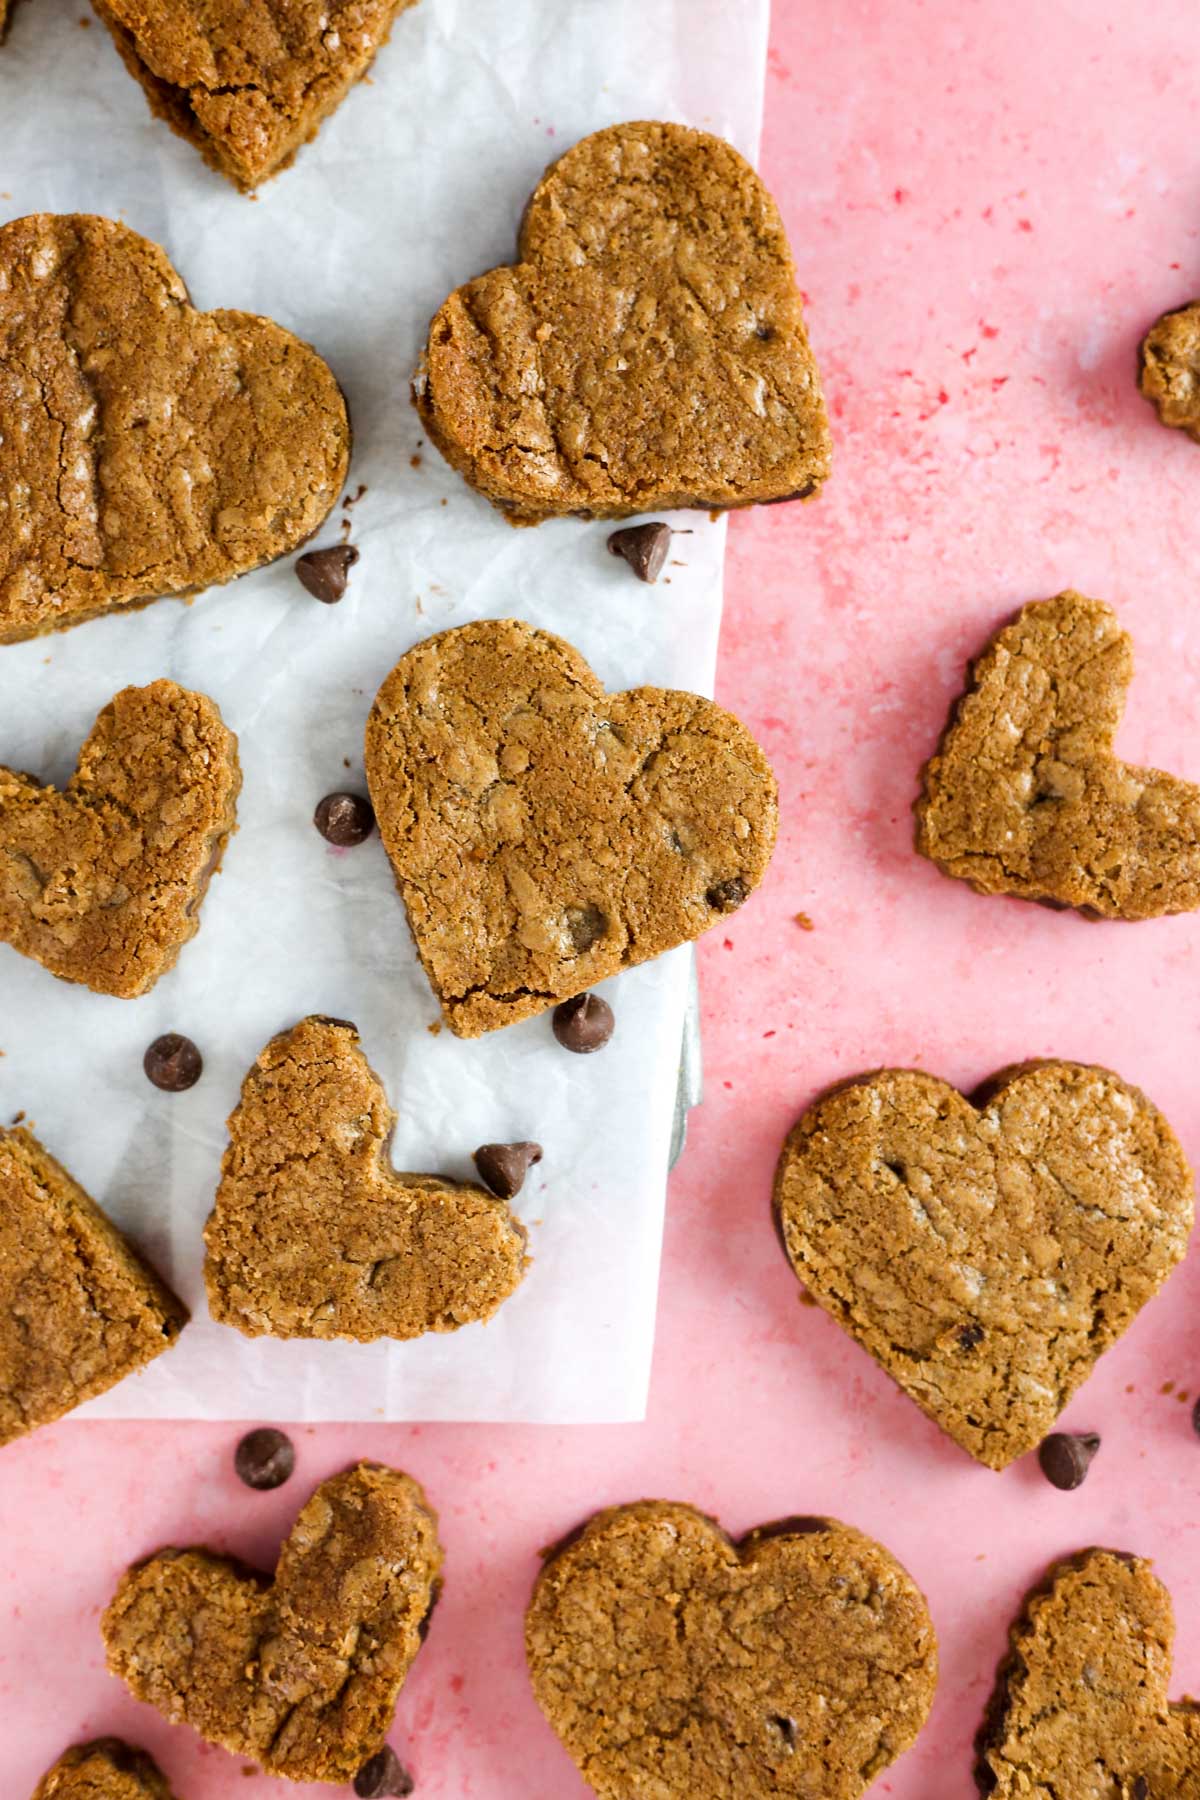 Heart shaped chocolate chip cookies